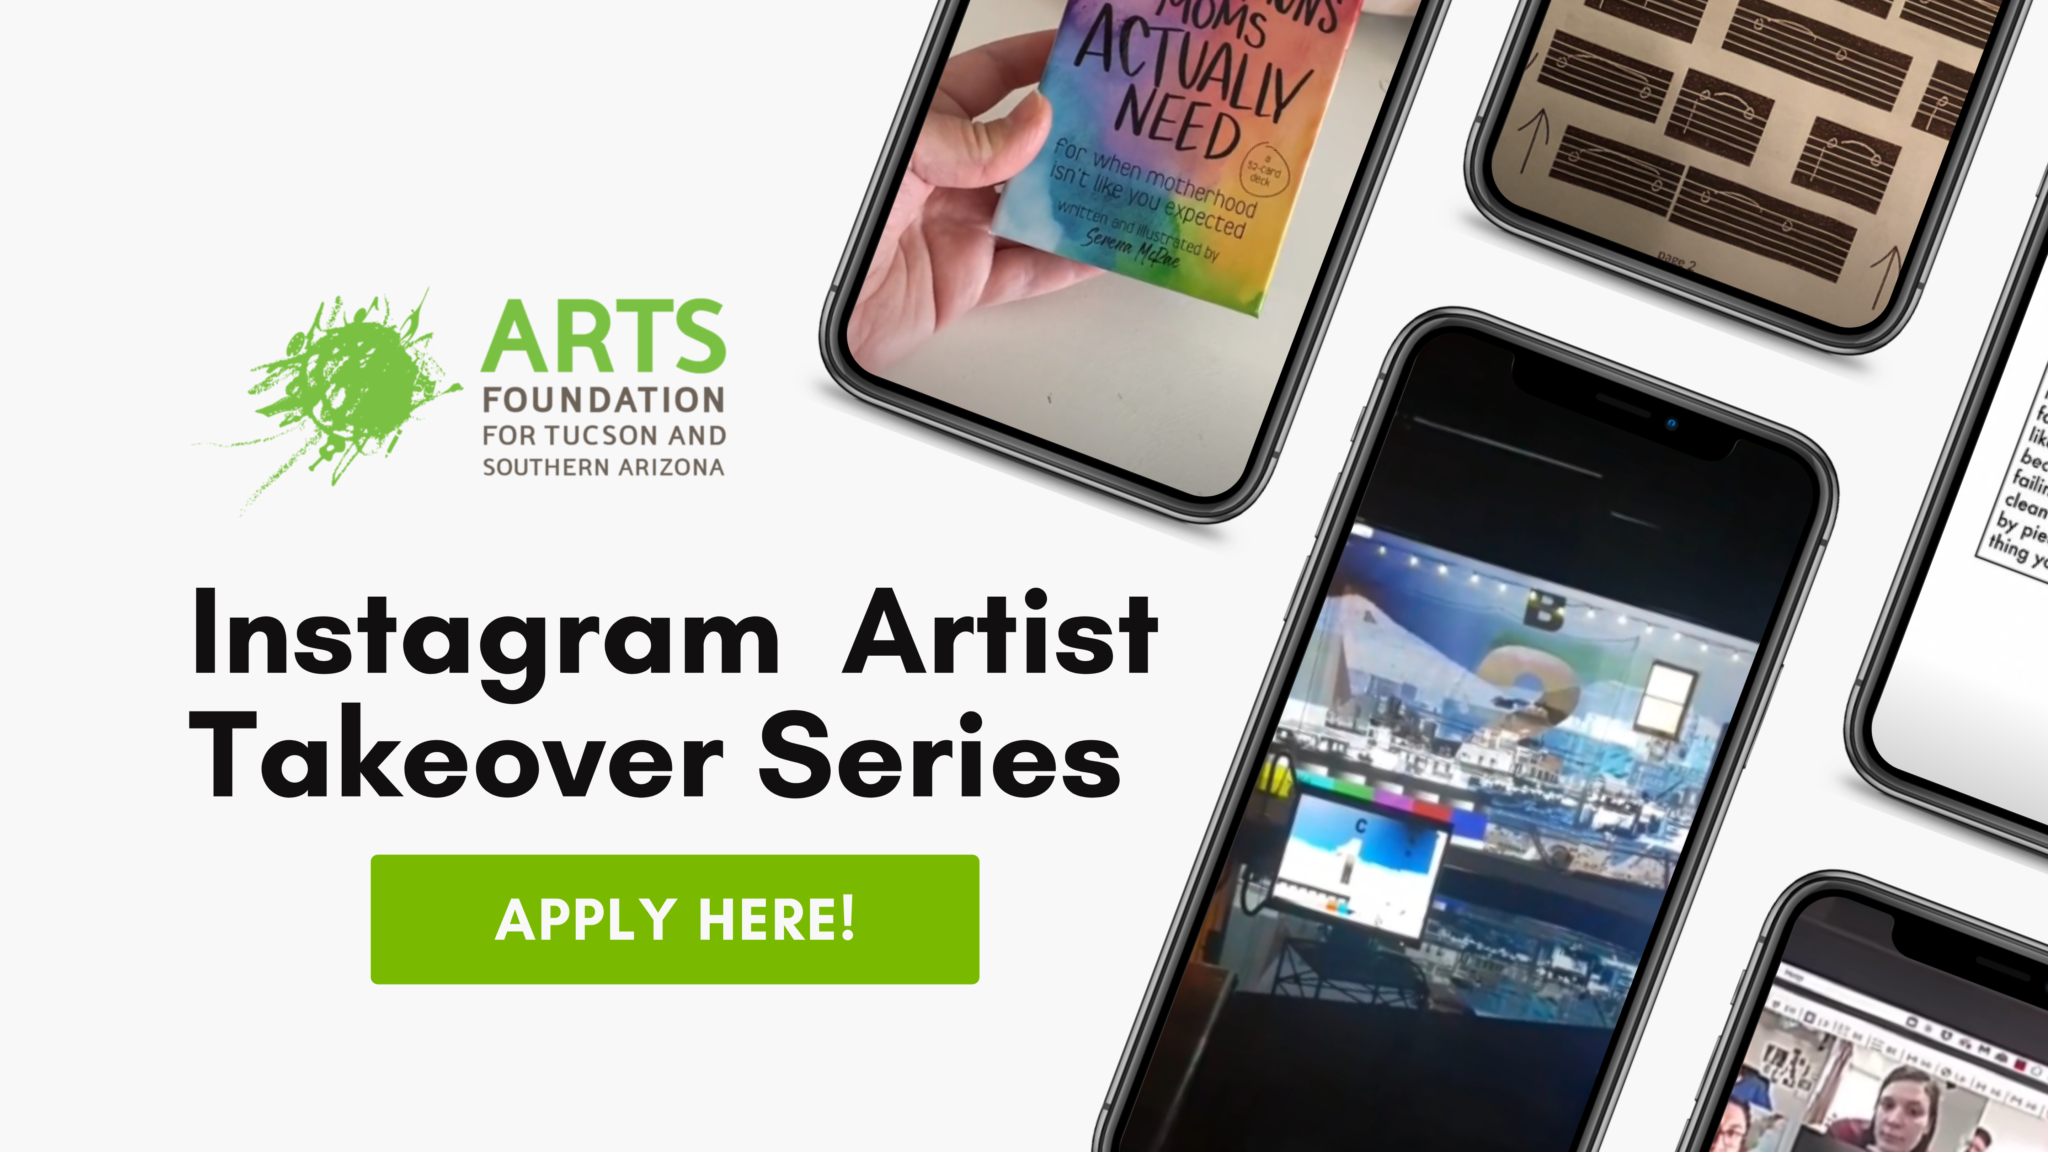 Apply to be a part of our Instagram Artist Takeover Series!